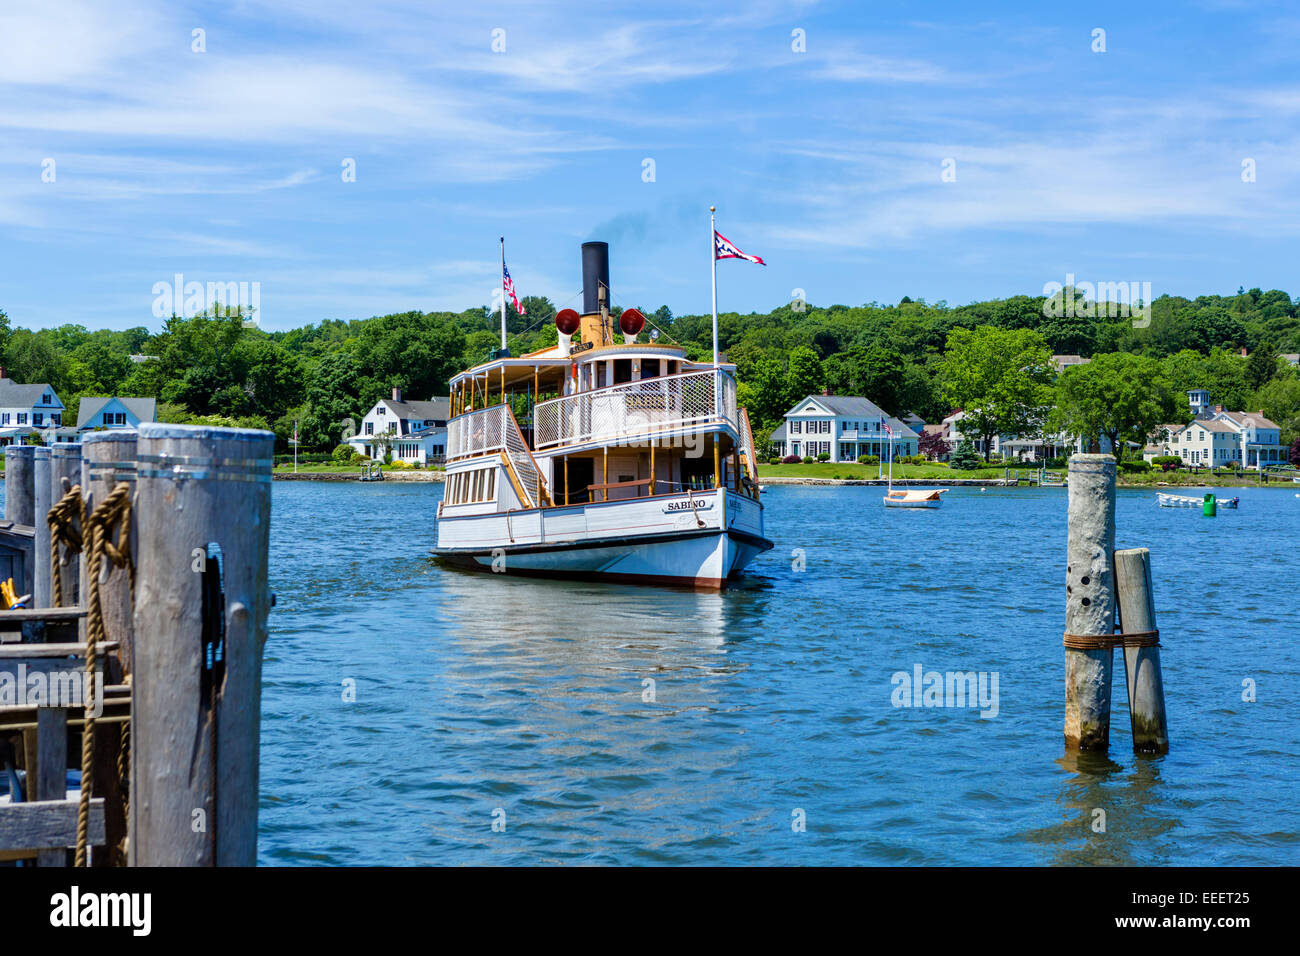 The coal-fired steamboat Sabino on the Mystic River at Mystic Seaport maritime museum, Mystic, Connecticut, USA Stock Photo